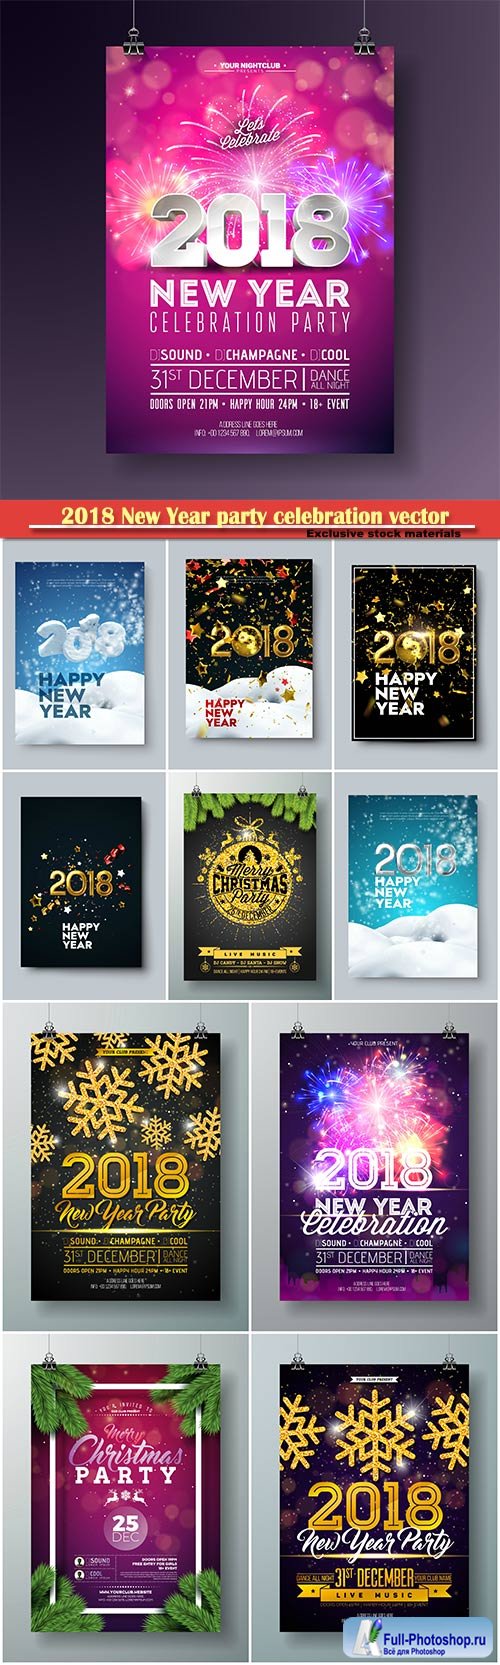 2018 New Year party celebration vector poster template